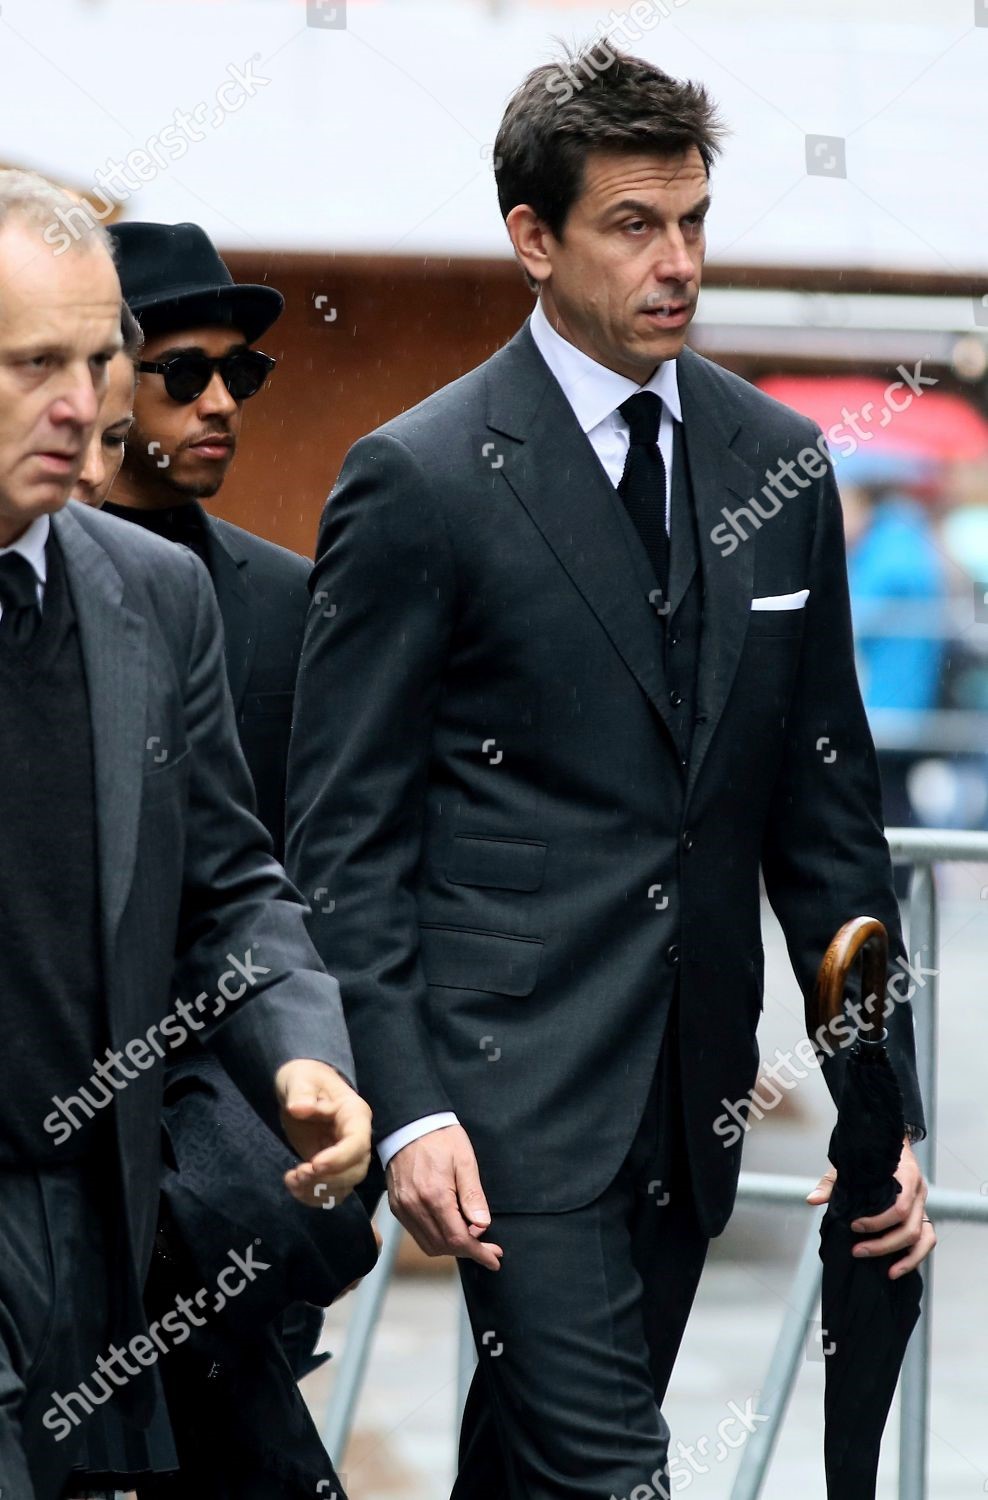 Toto Wolff at Lauda funeral in Vienna, Austria, in March 2019.